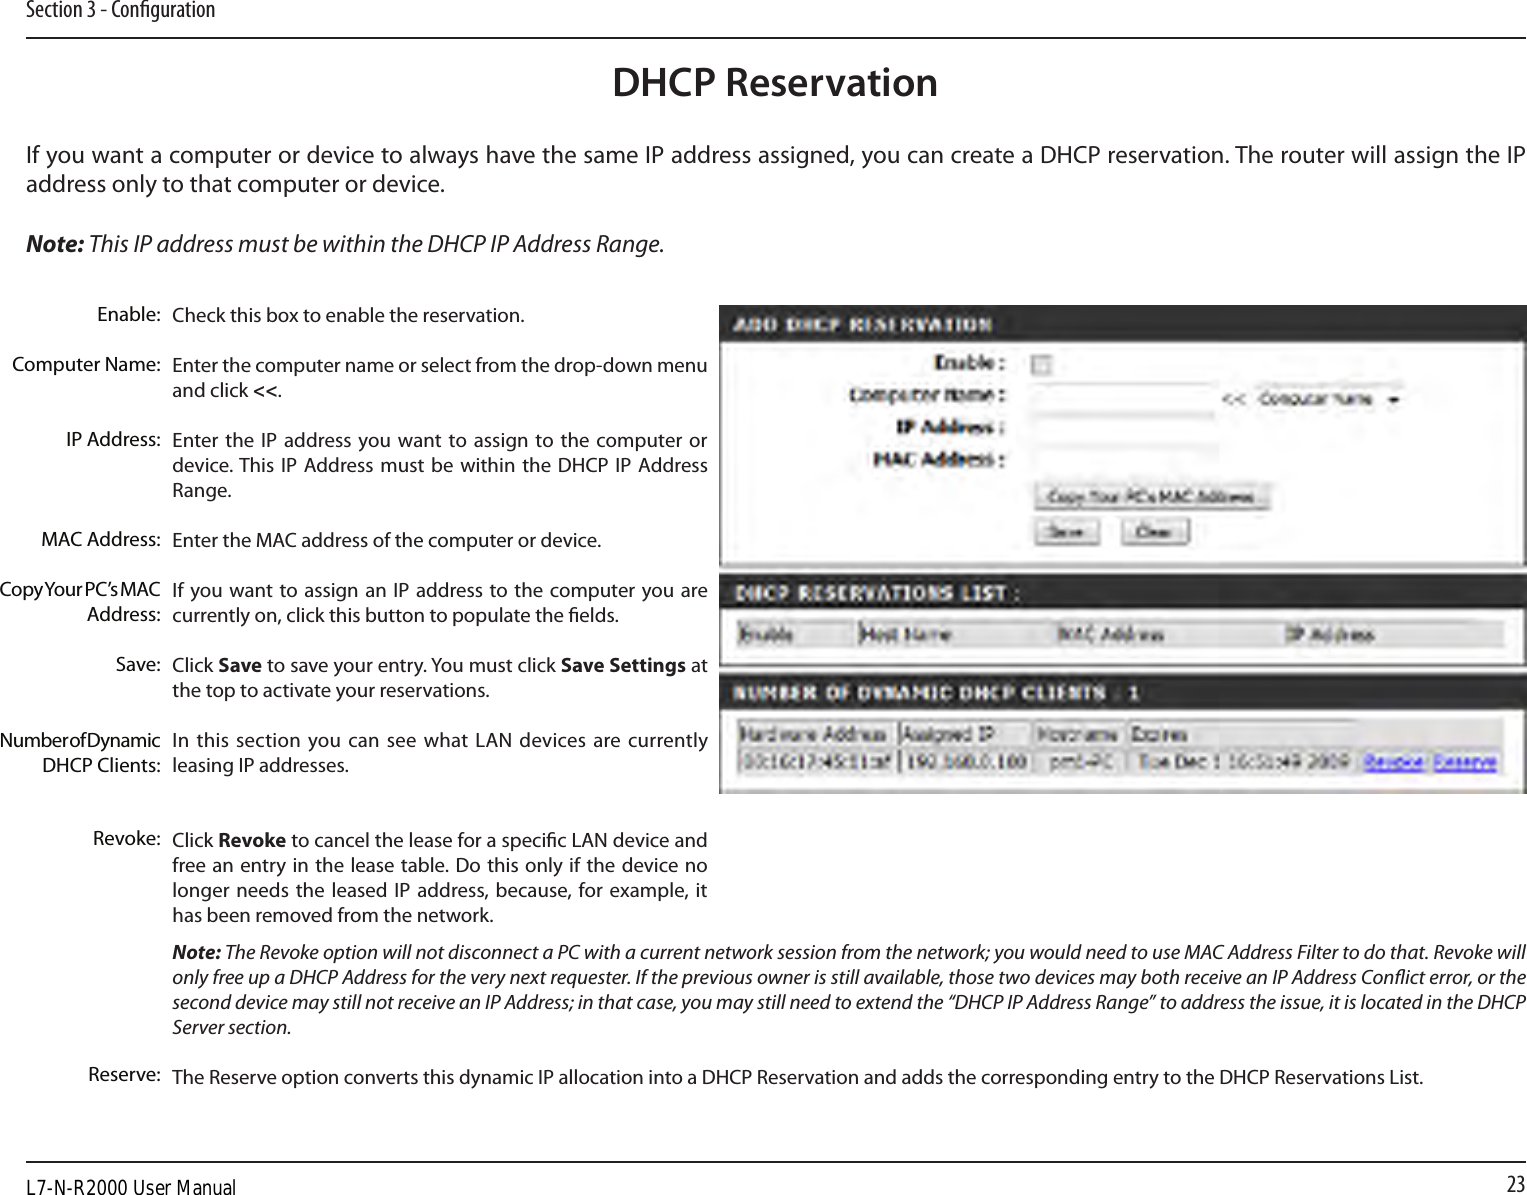 23Section 3 - CongurationDHCP ReservationIf you want a computer or device to always have the same IP address assigned, you can create a DHCP reservation. The router will assign the IP address only to that computer or device. Note: This IP address must be within the DHCP IP Address Range.Check this box to enable the reservation.Enter the computer name or select from the drop-down menu and click &lt;&lt;.Enter the IP address  you want to assign to the  computer or device. This  IP Address must be  within the DHCP  IP  Address Range.Enter the MAC address of the computer or device.If you want to assign  an IP  address to the computer you are currently on, click this button to populate the elds. Click Save to save your entry. You must click Save Settings at the top to activate your reservations. In this section you can see what  LAN  devices are currently leasing IP addresses.Click Revoke to cancel the lease for a specic LAN device and free an entry in the lease table. Do this only if the device no longer needs  the  leased IP address, because, for example, it has been removed from the network.Note: The Revoke option will not disconnect a PC with a current network session from the network; you would need to use MAC Address Filter to do that. Revoke will only free up a DHCP Address for the very next requester. If the previous owner is still available, those two devices may both receive an IP Address Conict error, or the second device may still not receive an IP Address; in that case, you may still need to extend the “DHCP IP Address Range” to address the issue, it is located in the DHCP Server section.  The Reserve option converts this dynamic IP allocation into a DHCP Reservation and adds the corresponding entry to the DHCP Reservations List.Enable:Computer Name:IP Address:MAC Address:Copy Your PC’s MAC Address:Save:Number of Dynamic DHCP Clients:Revoke:Reserve:L7-N-R2000 User Manual